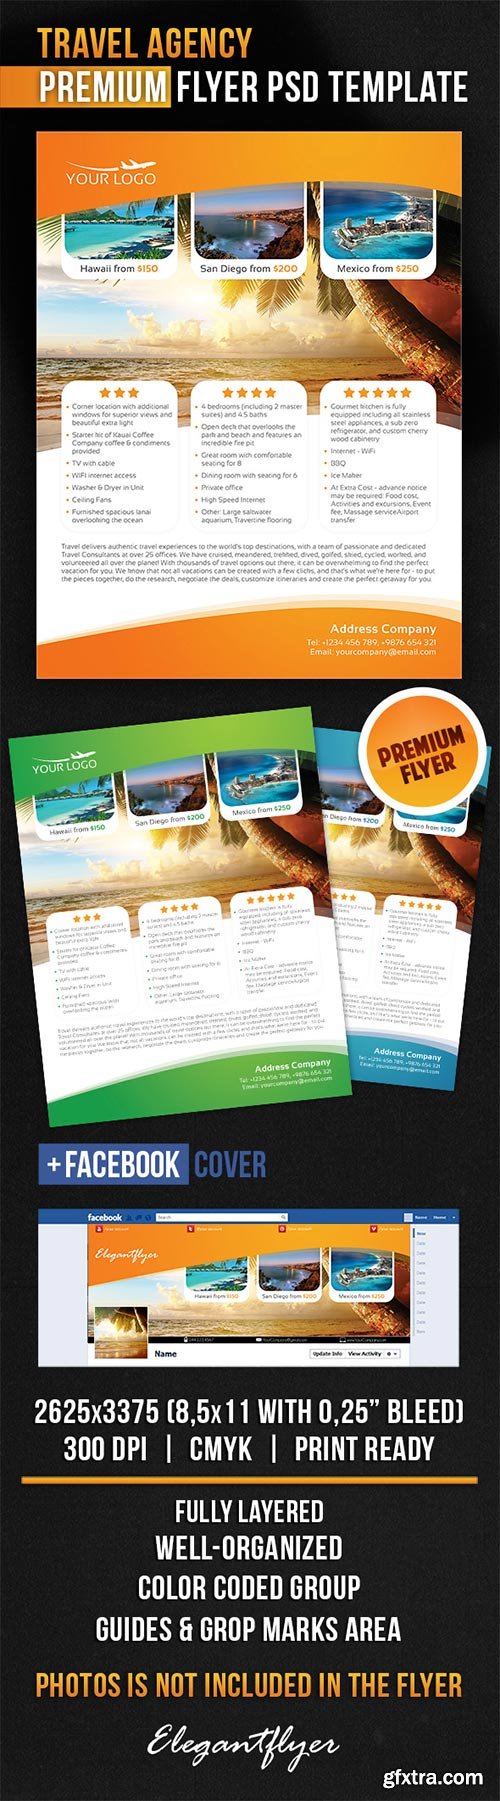 Travel Agency Flyer PSD Template + Facebook Cover